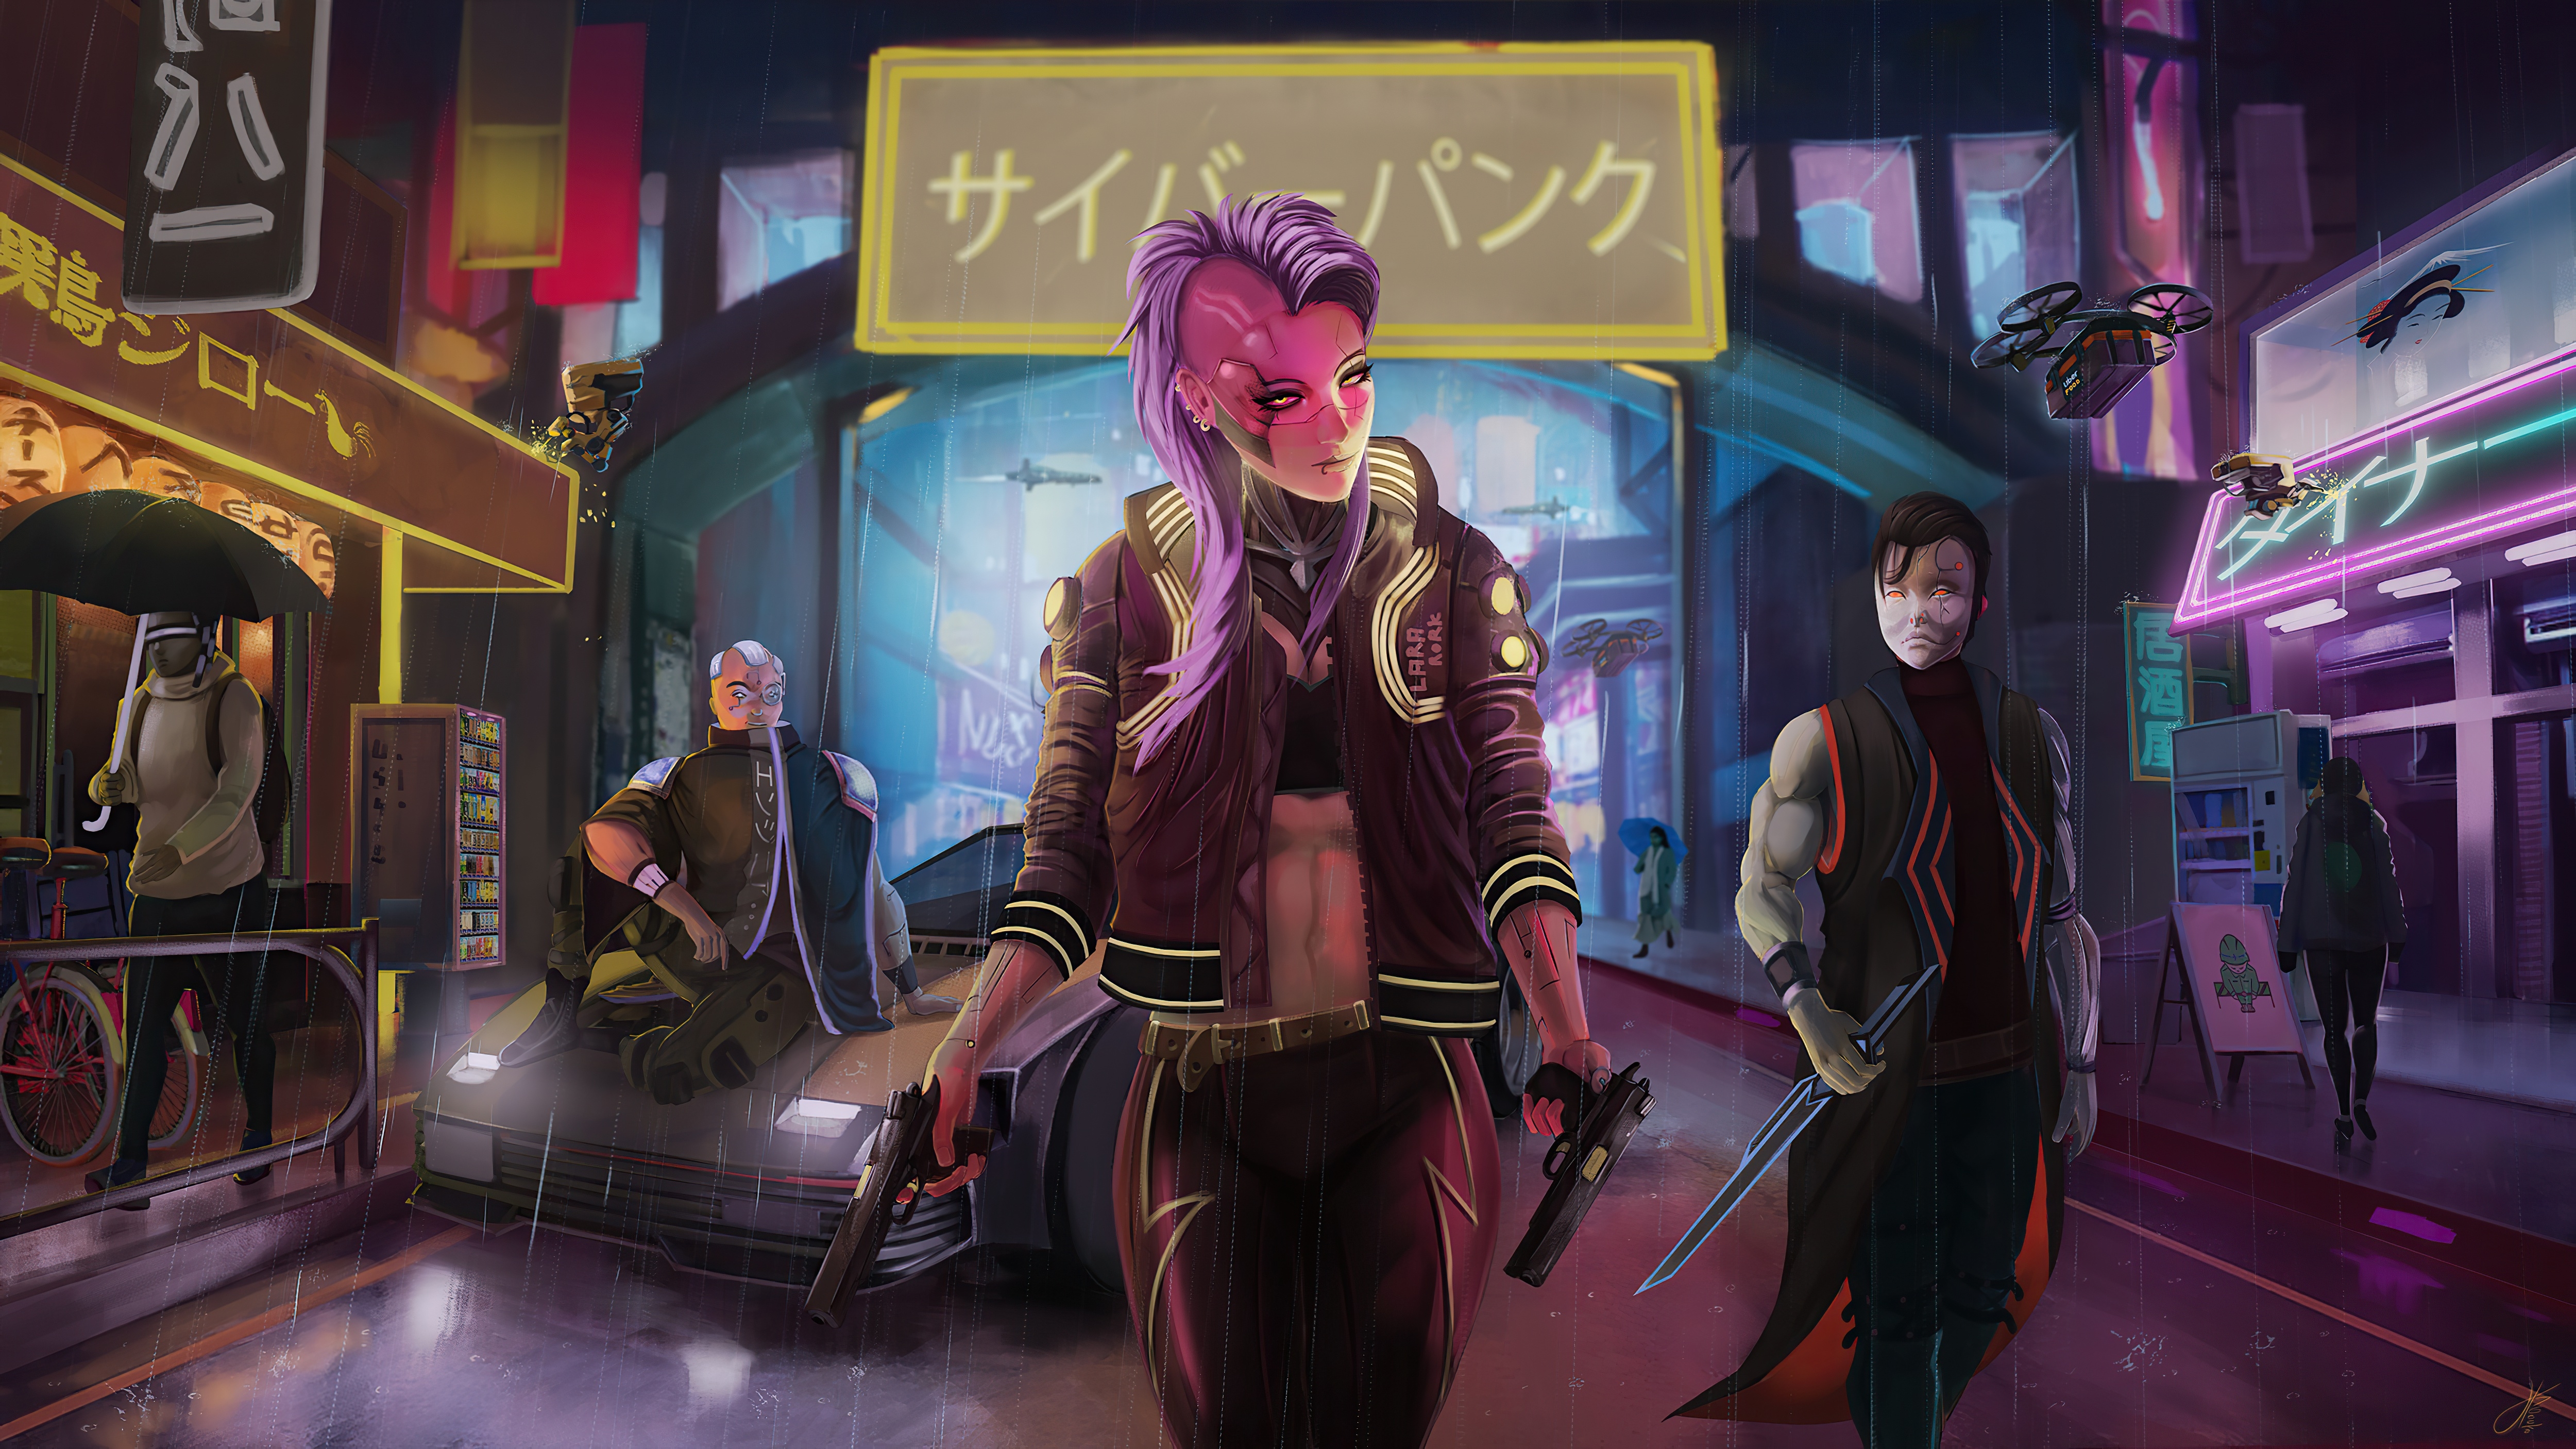 Purple Hair Cyberpunk Girl 5k Wallpaper Hd Games 4k Wallpapers Images Photos And Background Wallpapers Den